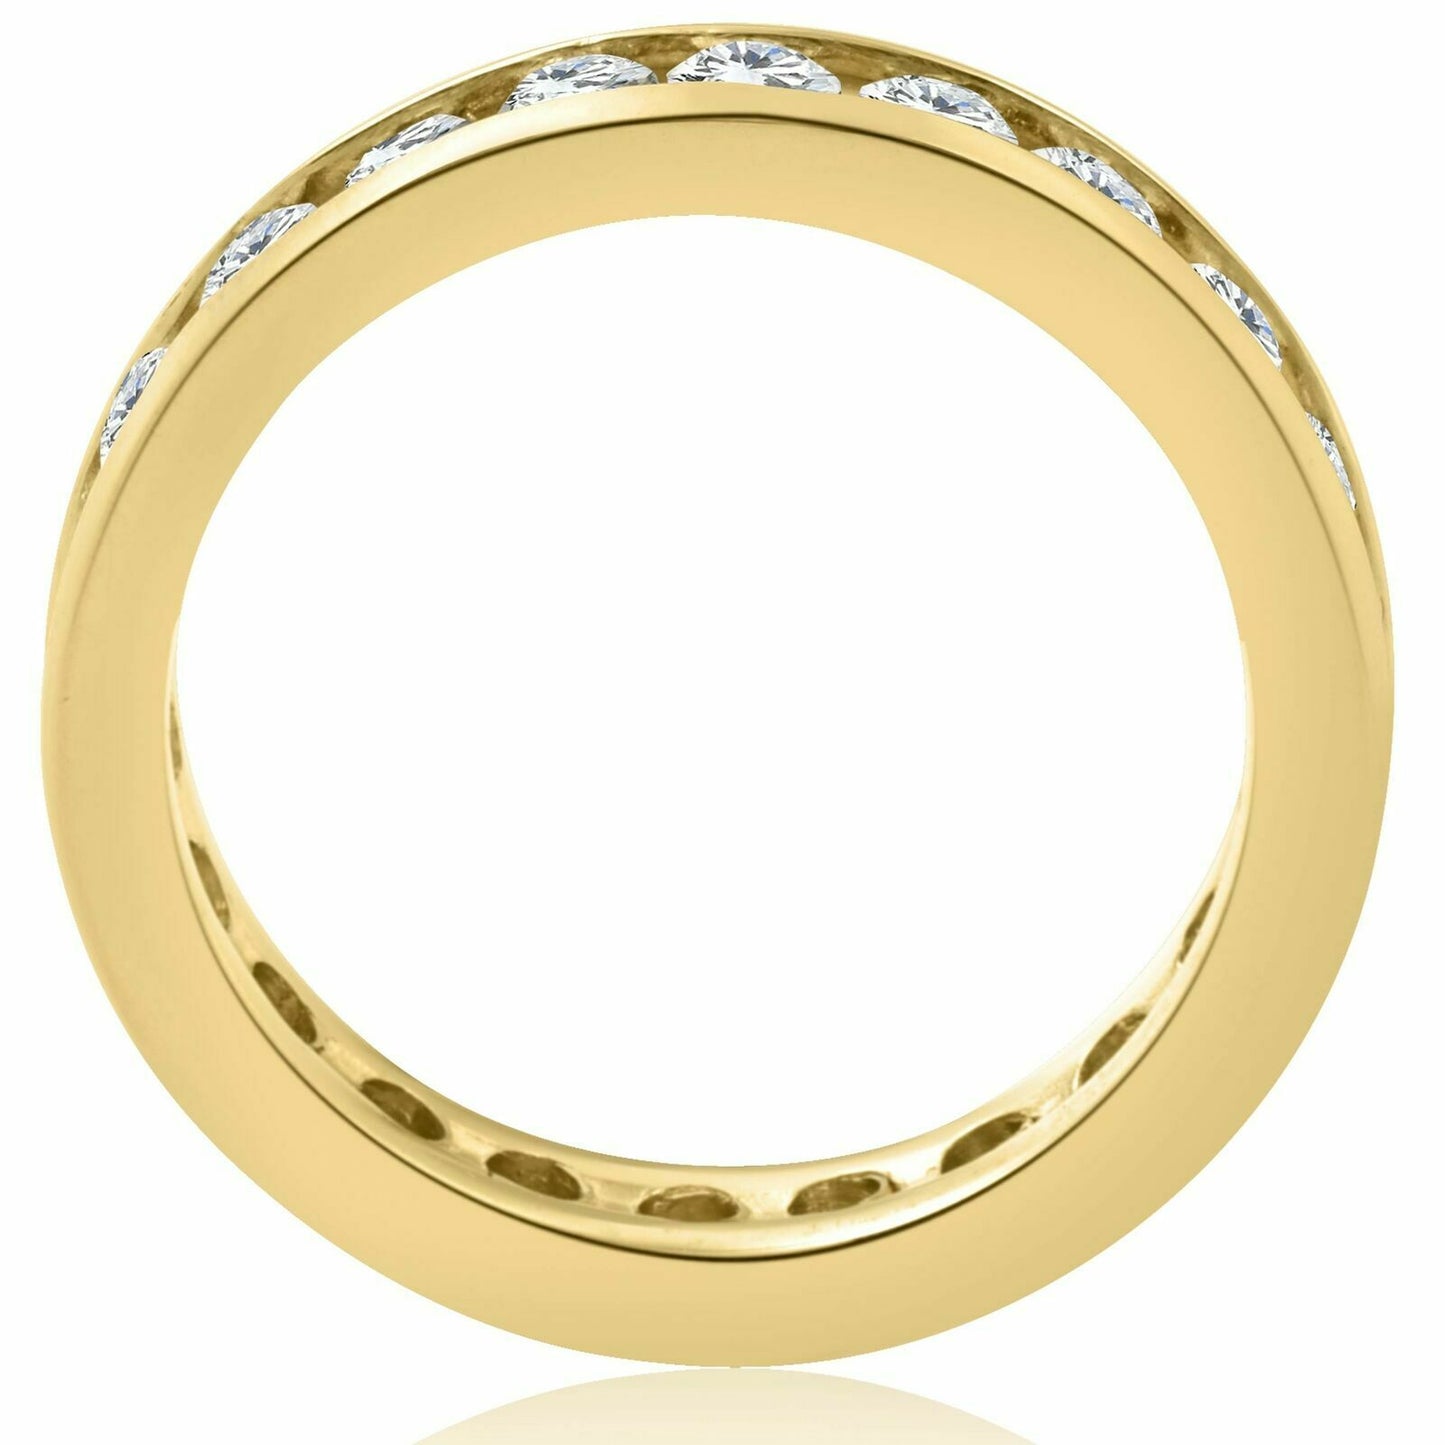 14K Yellow Gold 2 ct Channel Set Eternity Womens Anniversary Wedding Band Ring